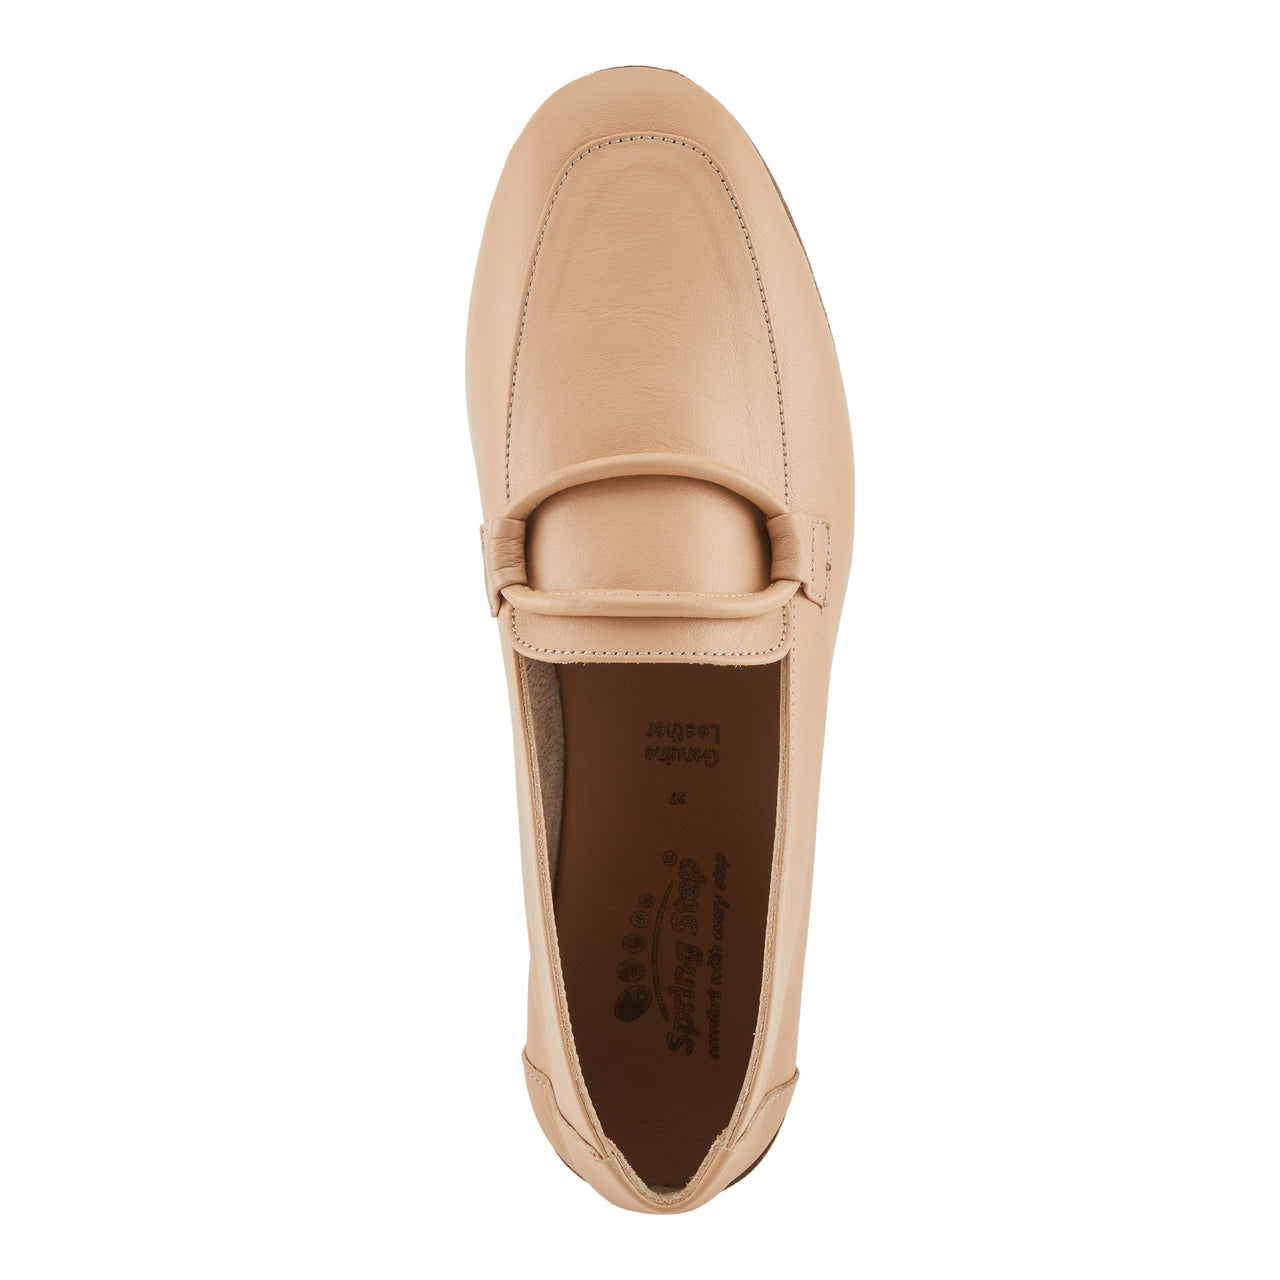 Black leather Spring Step Carrington shoes with cushioned insoles and slip-resistant soles for all-day comfort and safety